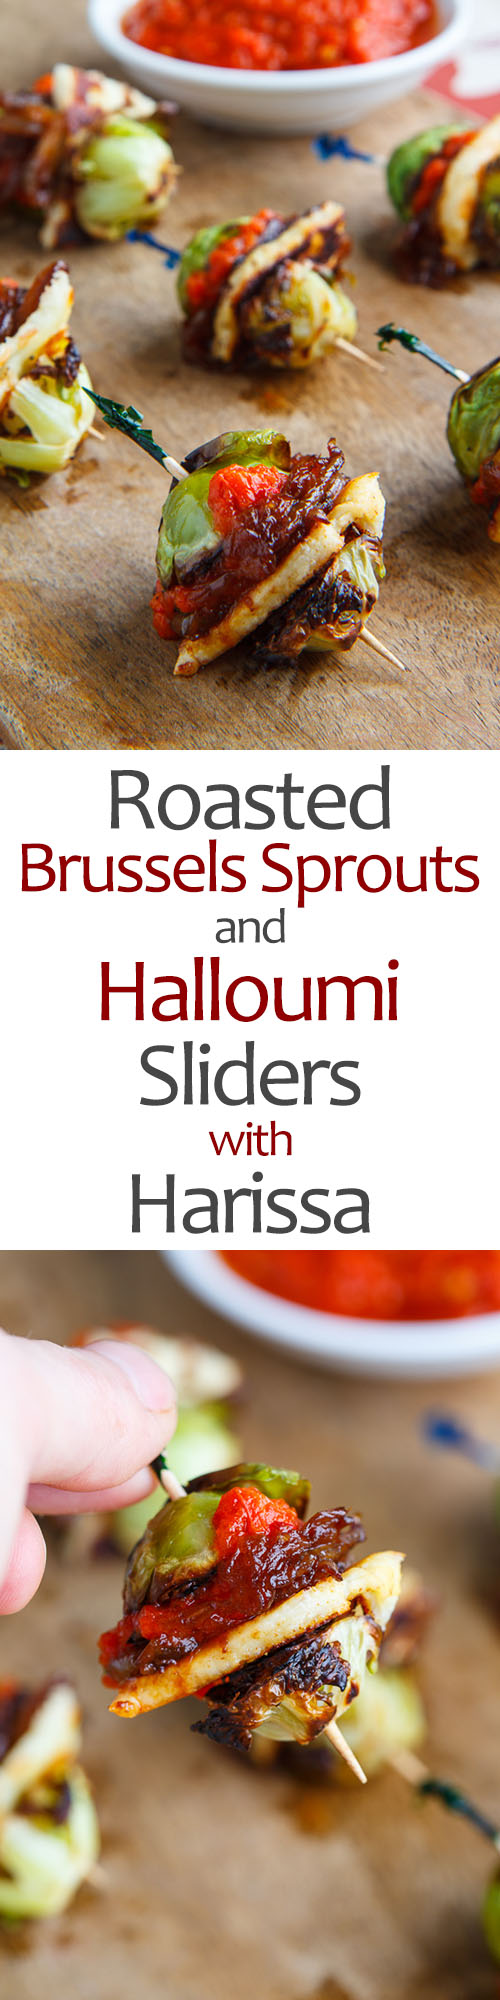 Roasted Brussels Sprouts and Halloumi Sliders with Harissa